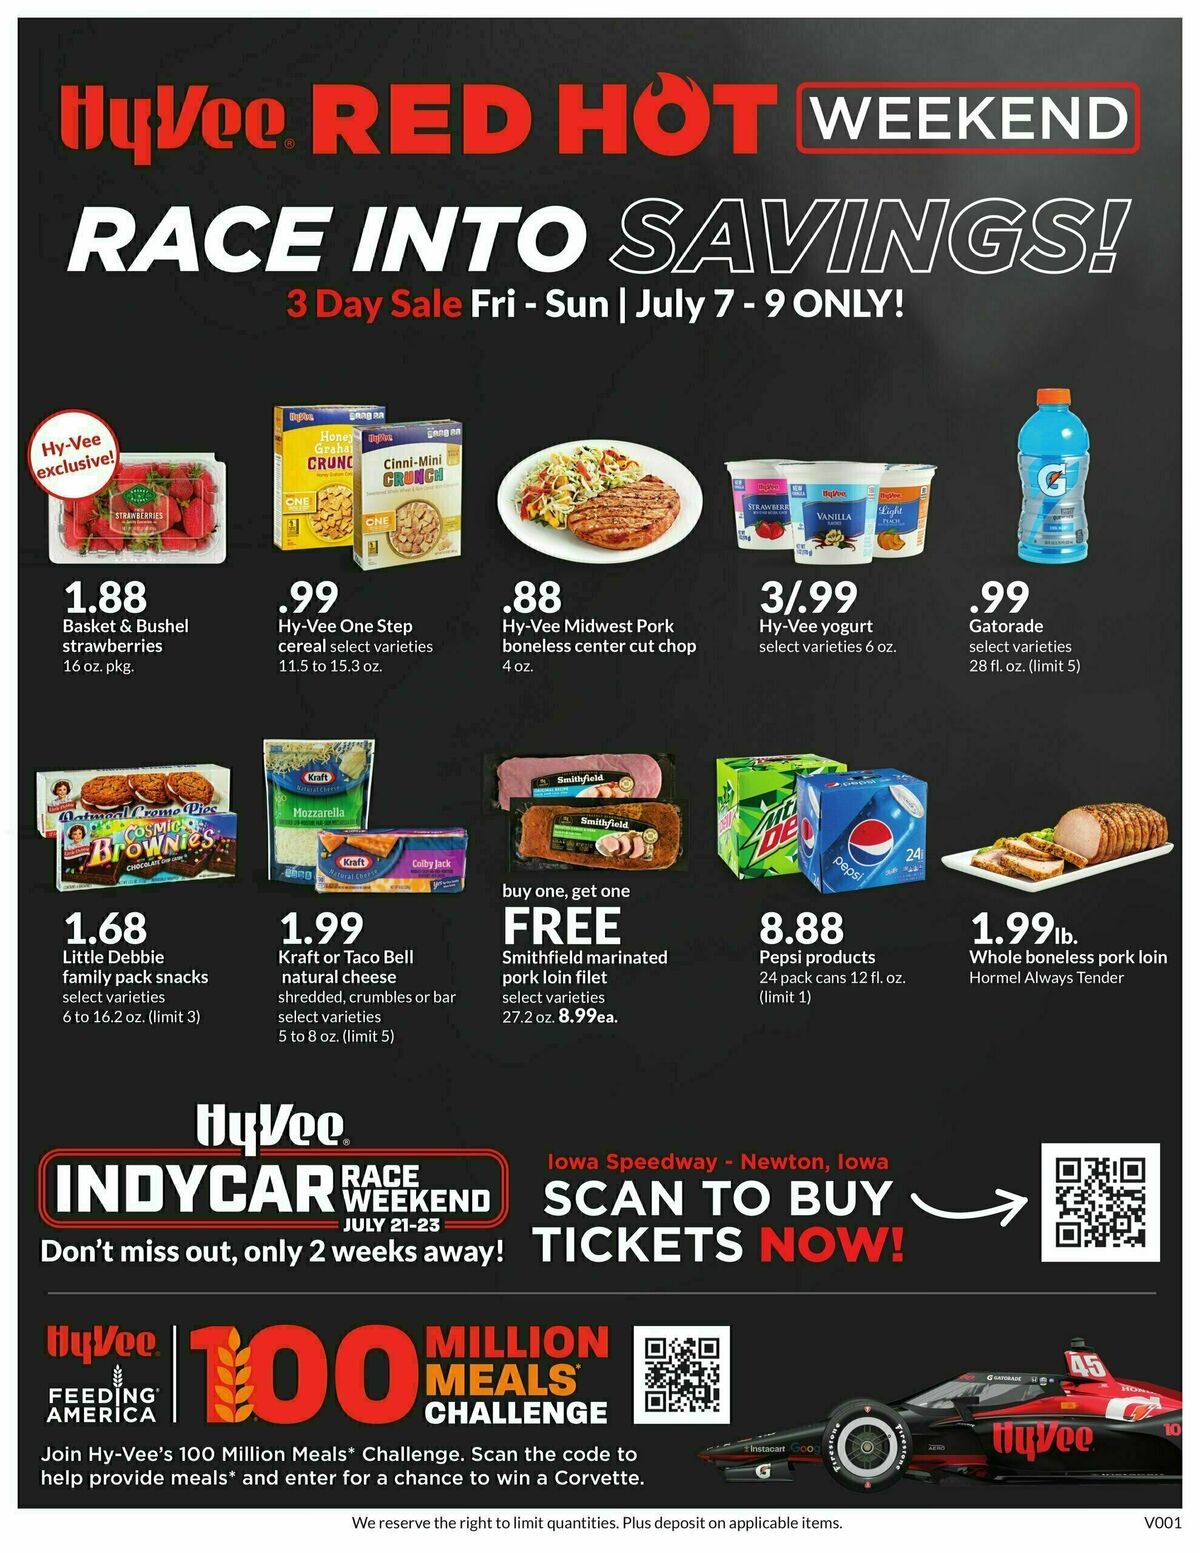 Hy-Vee Race Into Savings! Weekly Ad from July 7